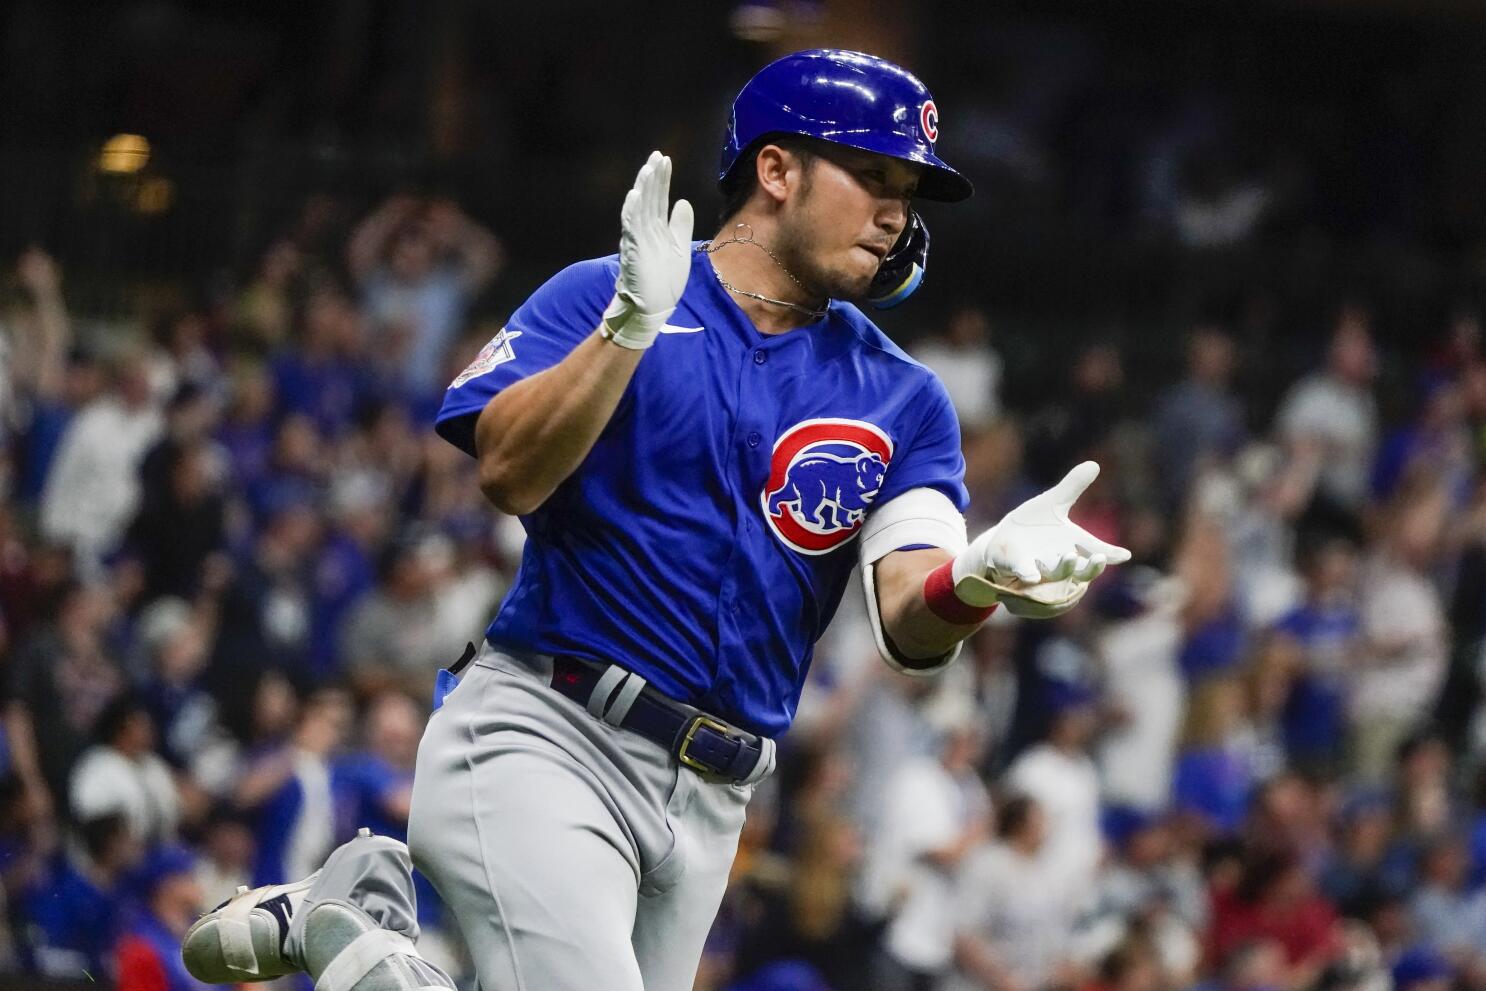 Cubs 4, Brewers 1: Willson Contreras injured during well-played win